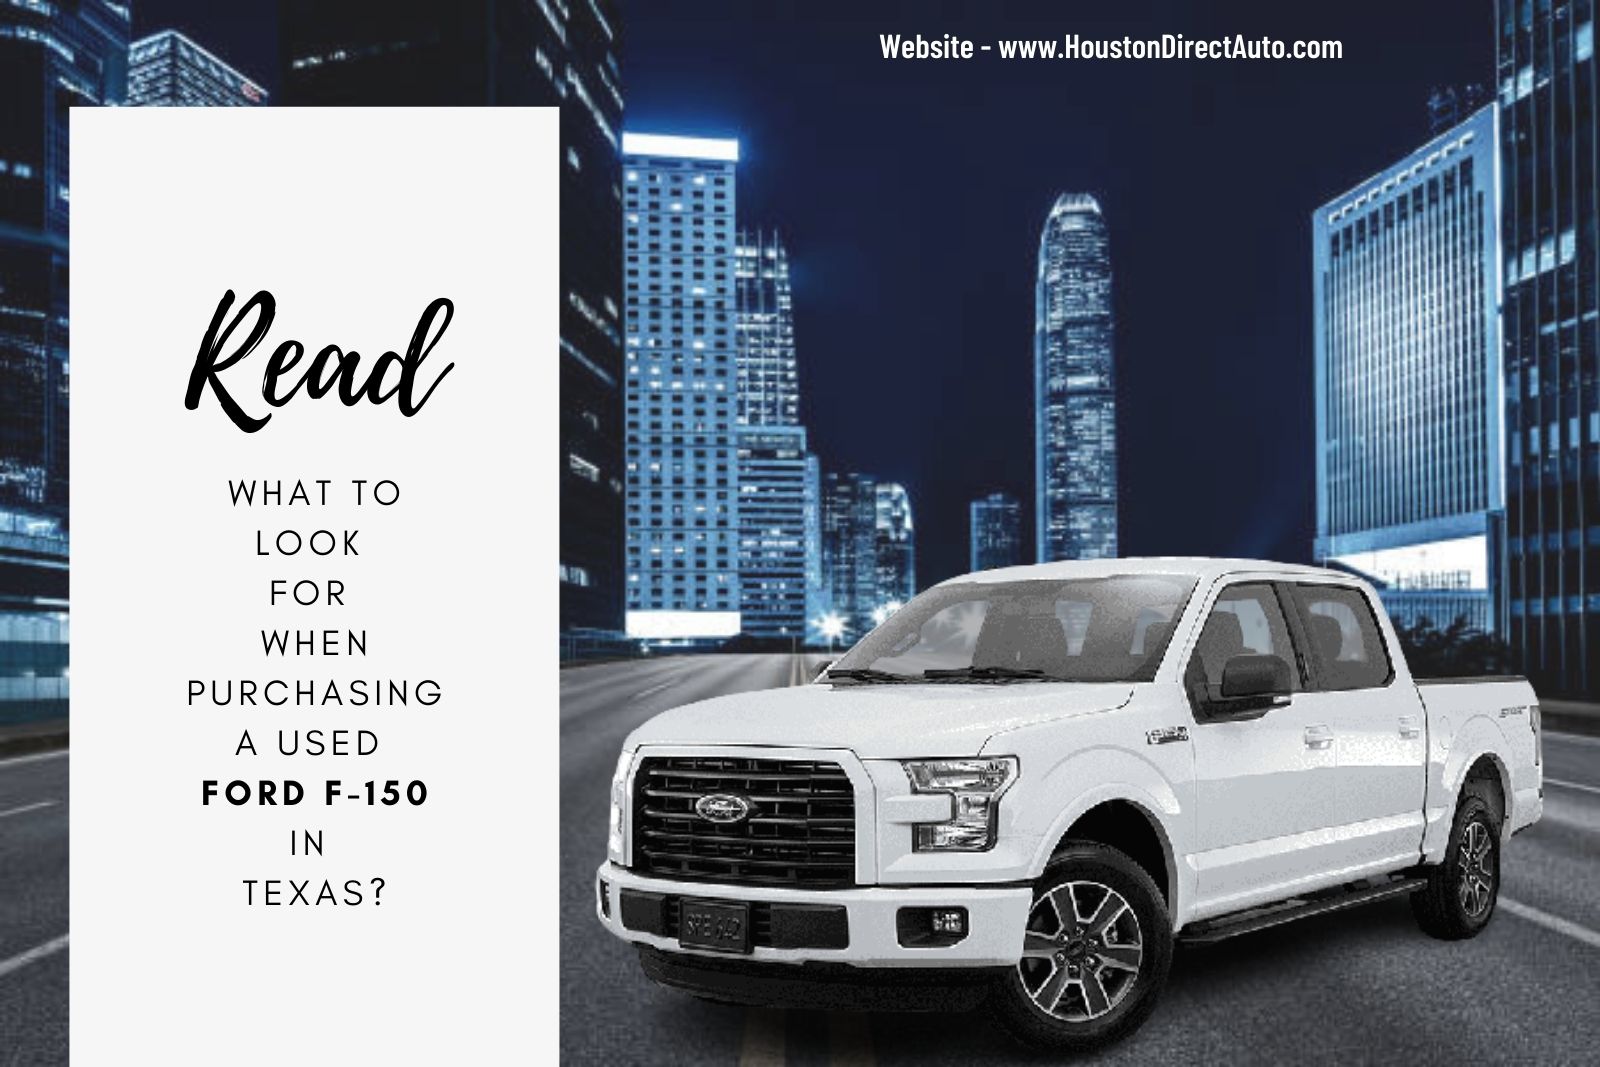 Ford Cars For Sale In Houston TX